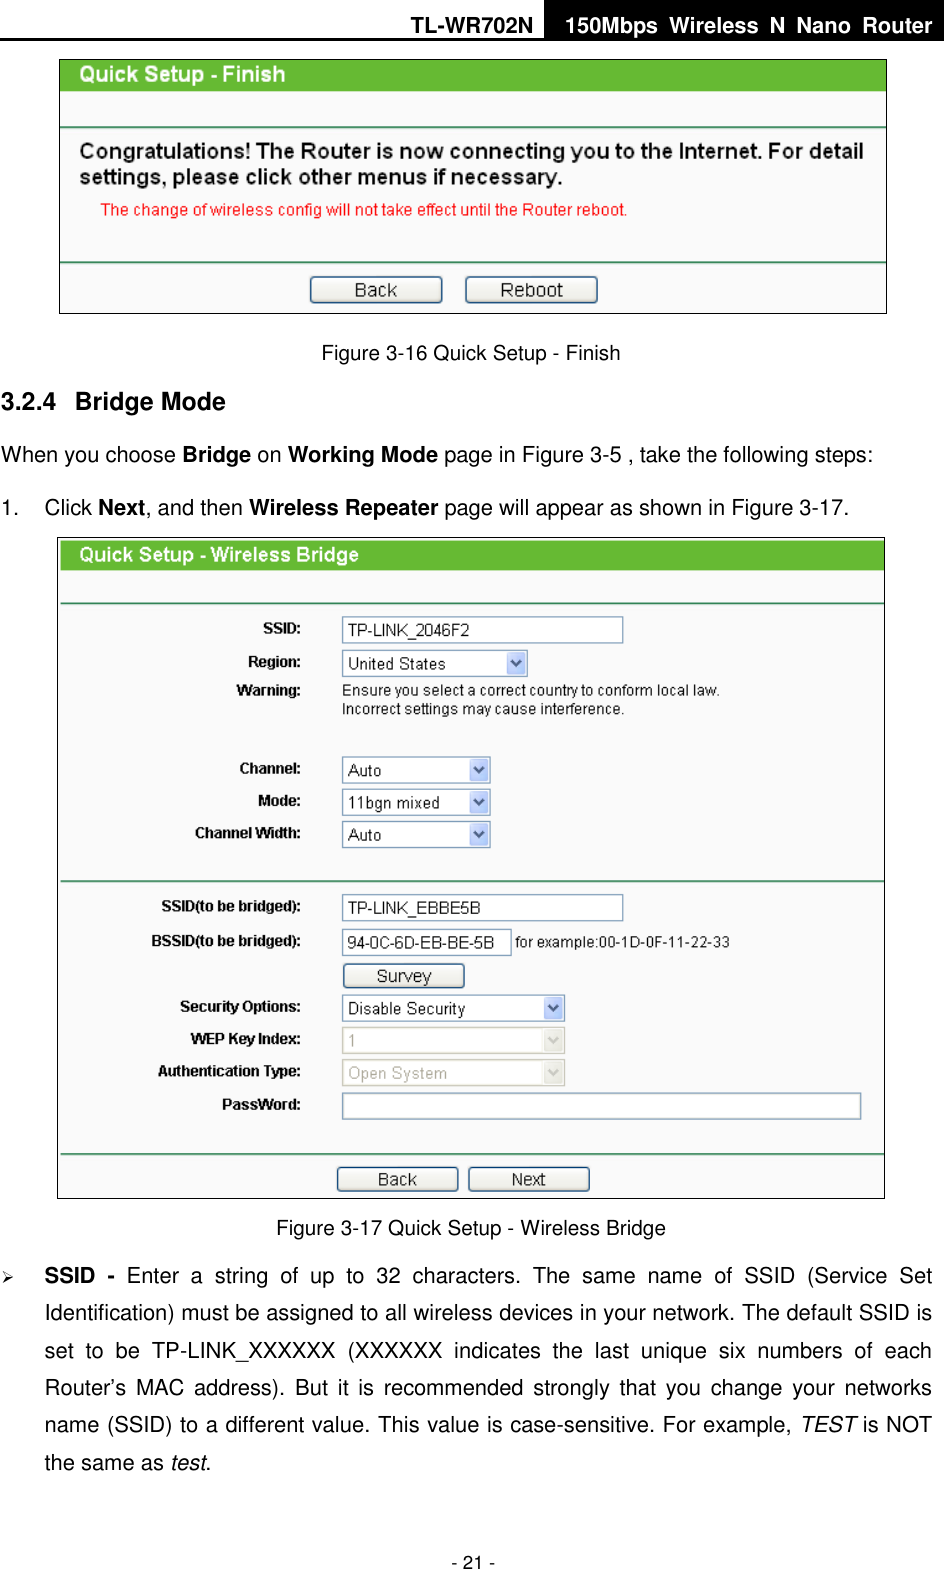 TL-WR702N 150Mbps  Wireless  N  Nano  Router  - 21 -  Figure 3-16 Quick Setup - Finish 3.2.4  Bridge Mode When you choose Bridge on Working Mode page in Figure 3-5 , take the following steps: 1.  Click Next, and then Wireless Repeater page will appear as shown in Figure 3-17.  Figure 3-17 Quick Setup - Wireless Bridge  SSID  -  Enter  a  string  of  up  to  32  characters.  The  same  name  of  SSID  (Service  Set Identification) must be assigned to all wireless devices in your network. The default SSID is set  to  be  TP-LINK_XXXXXX  (XXXXXX  indicates  the  last  unique  six  numbers  of  each Router’s MAC  address).  But  it  is  recommended strongly  that you change  your  networks name (SSID) to a different value. This value is case-sensitive. For example, TEST is NOT the same as test. 